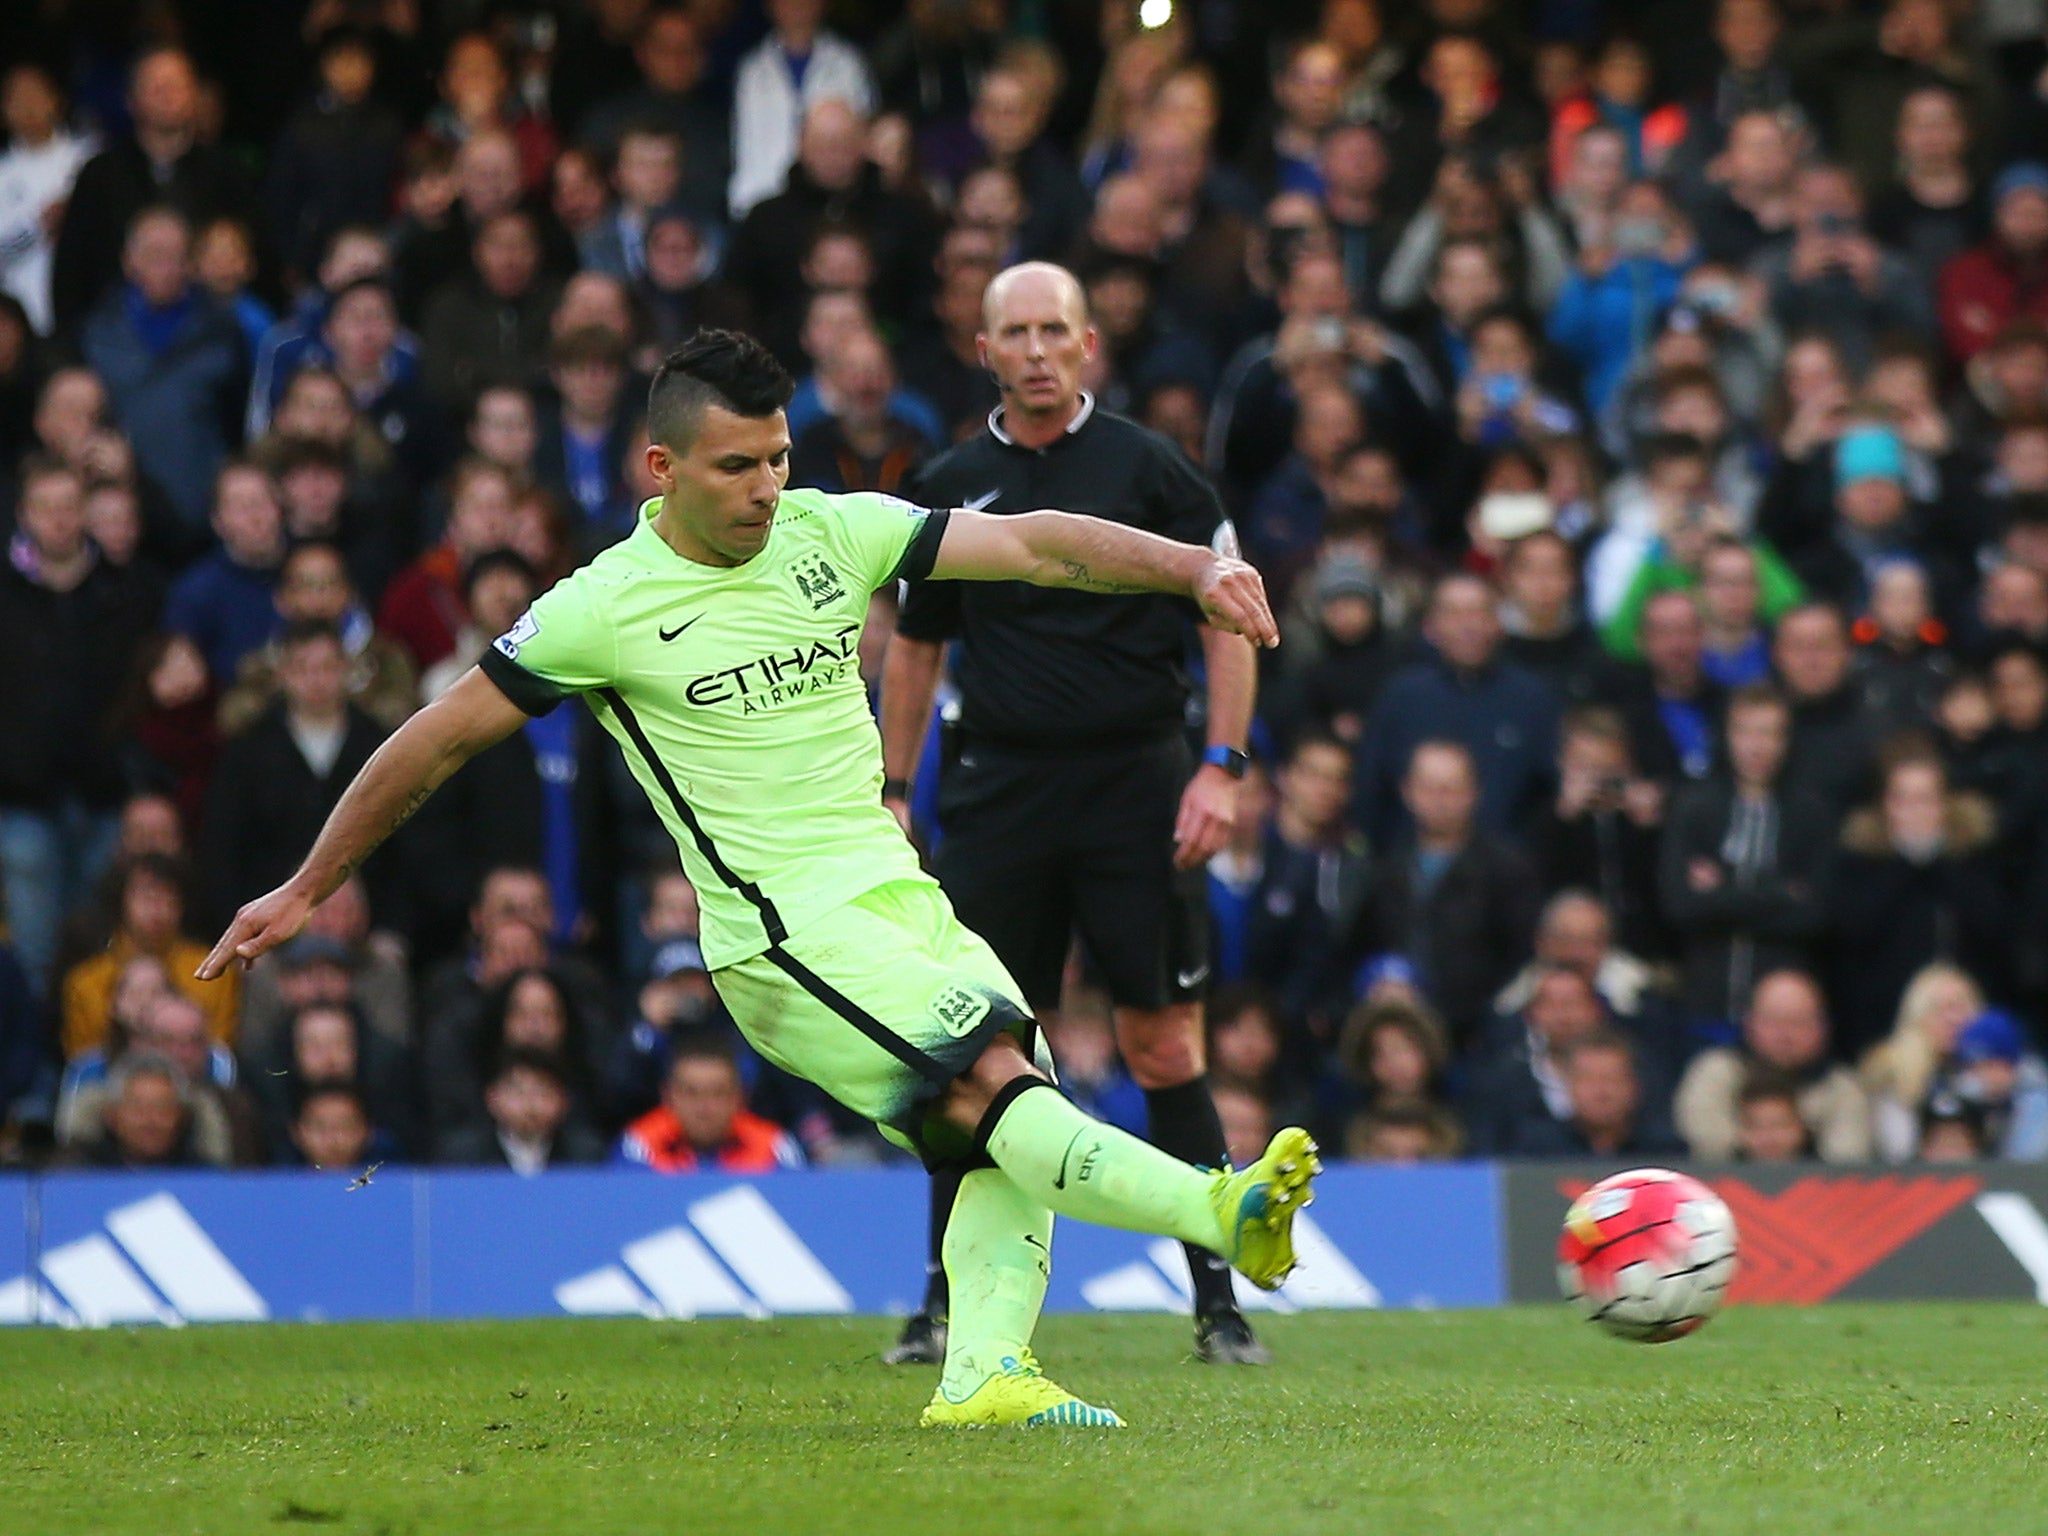 Sergio Aguero has scored 99 goals in the Premier League for Manchester City